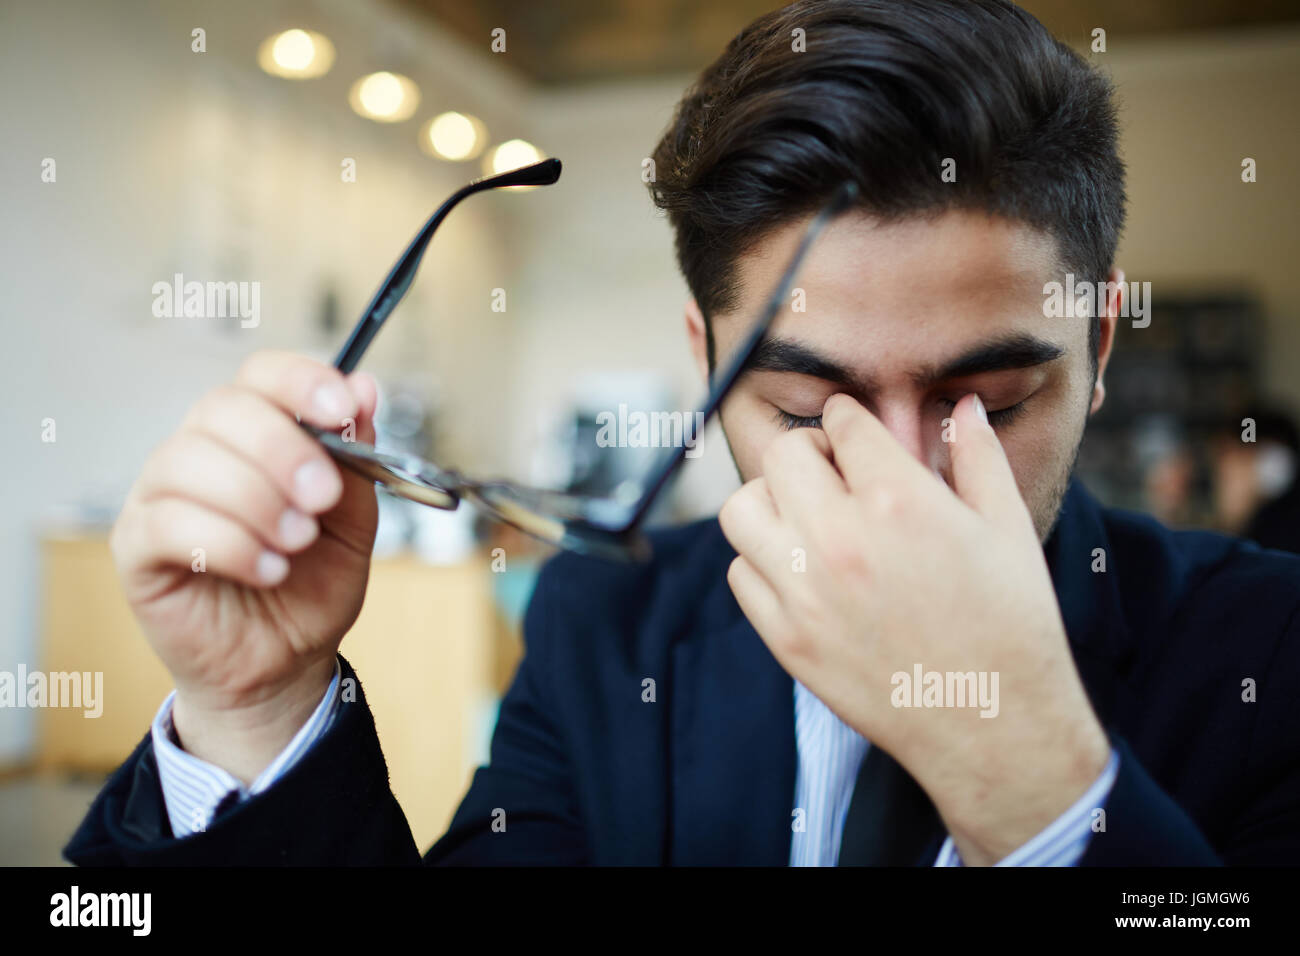 Stressed or tired man with eyeglasses Stock Photo